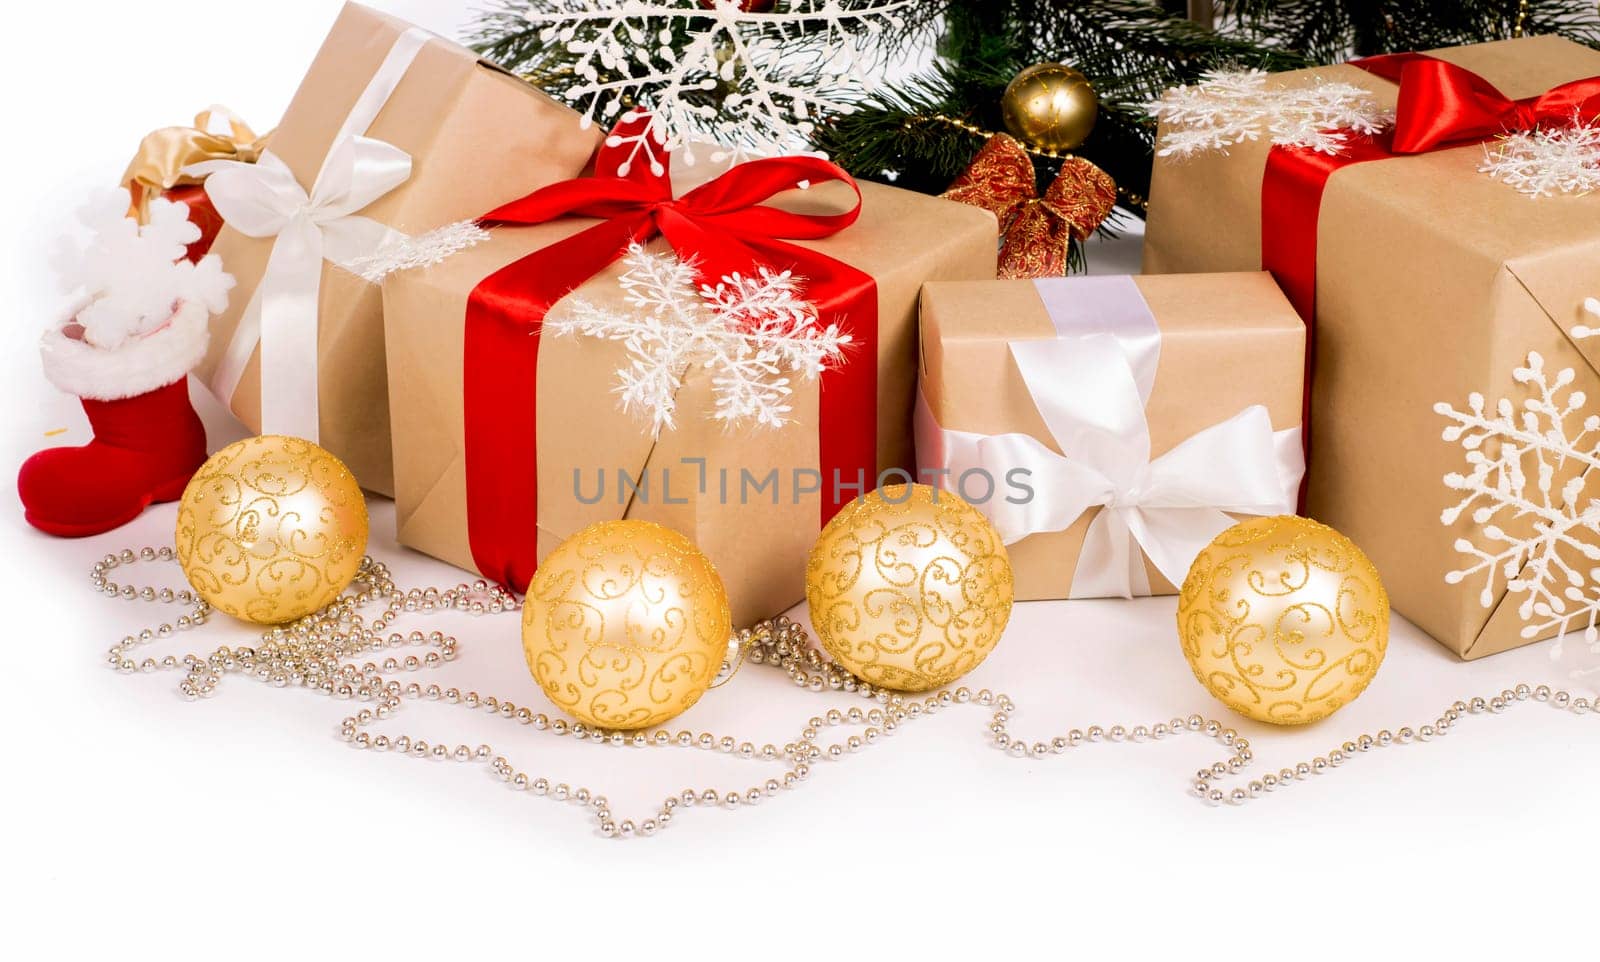 Christmas background, celebration, New Year's eve party, sale, presents concept. Beautiful gift boxes with handmade embellishments and food decorations, template with copyspace by aprilphoto